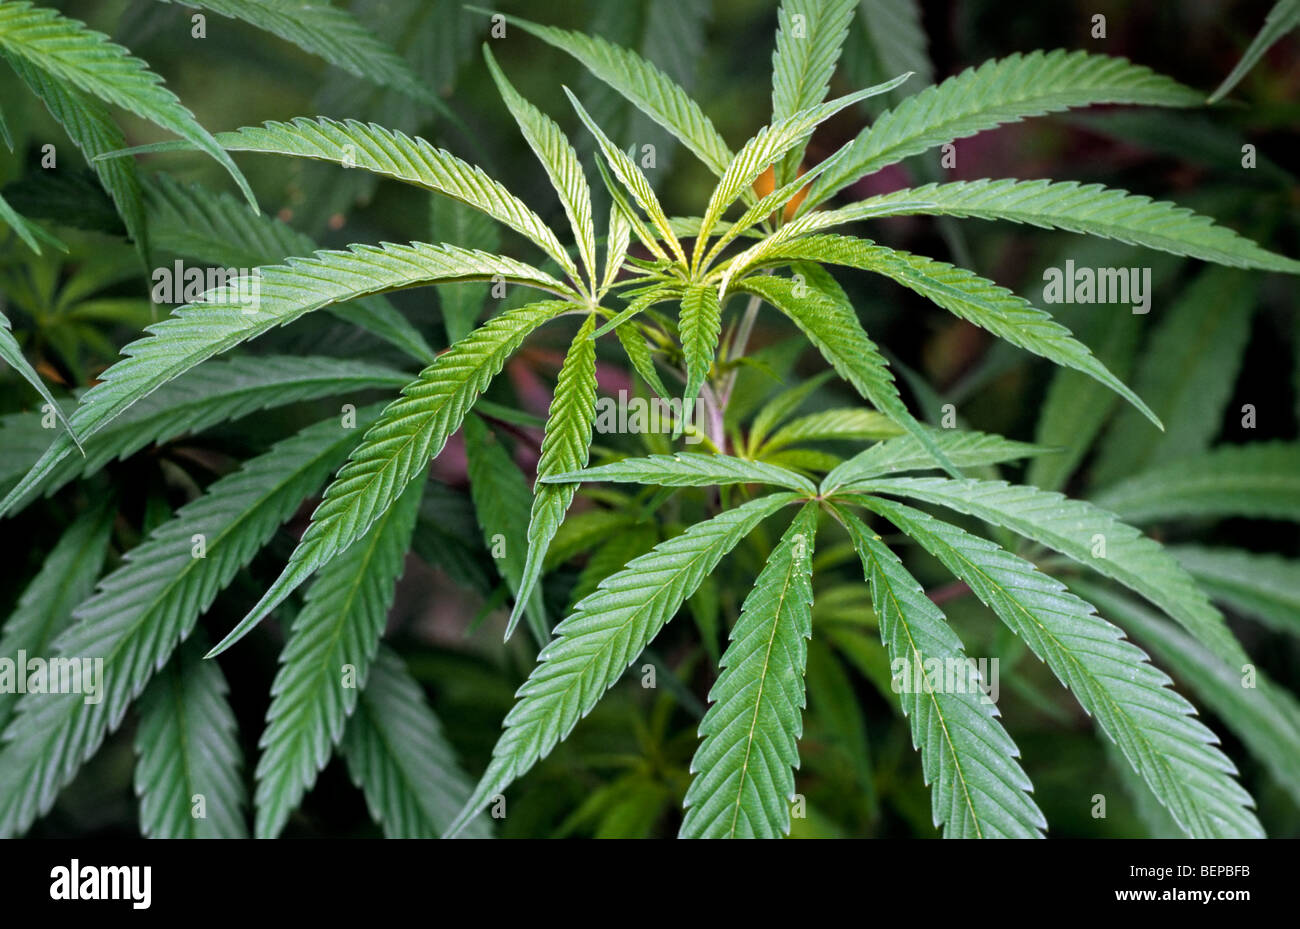 Indian hemp / Cannabis plant (Cannabis indica / Cannabis sativa) growing on plantation for medicinal purposes or as drug Stock Photo